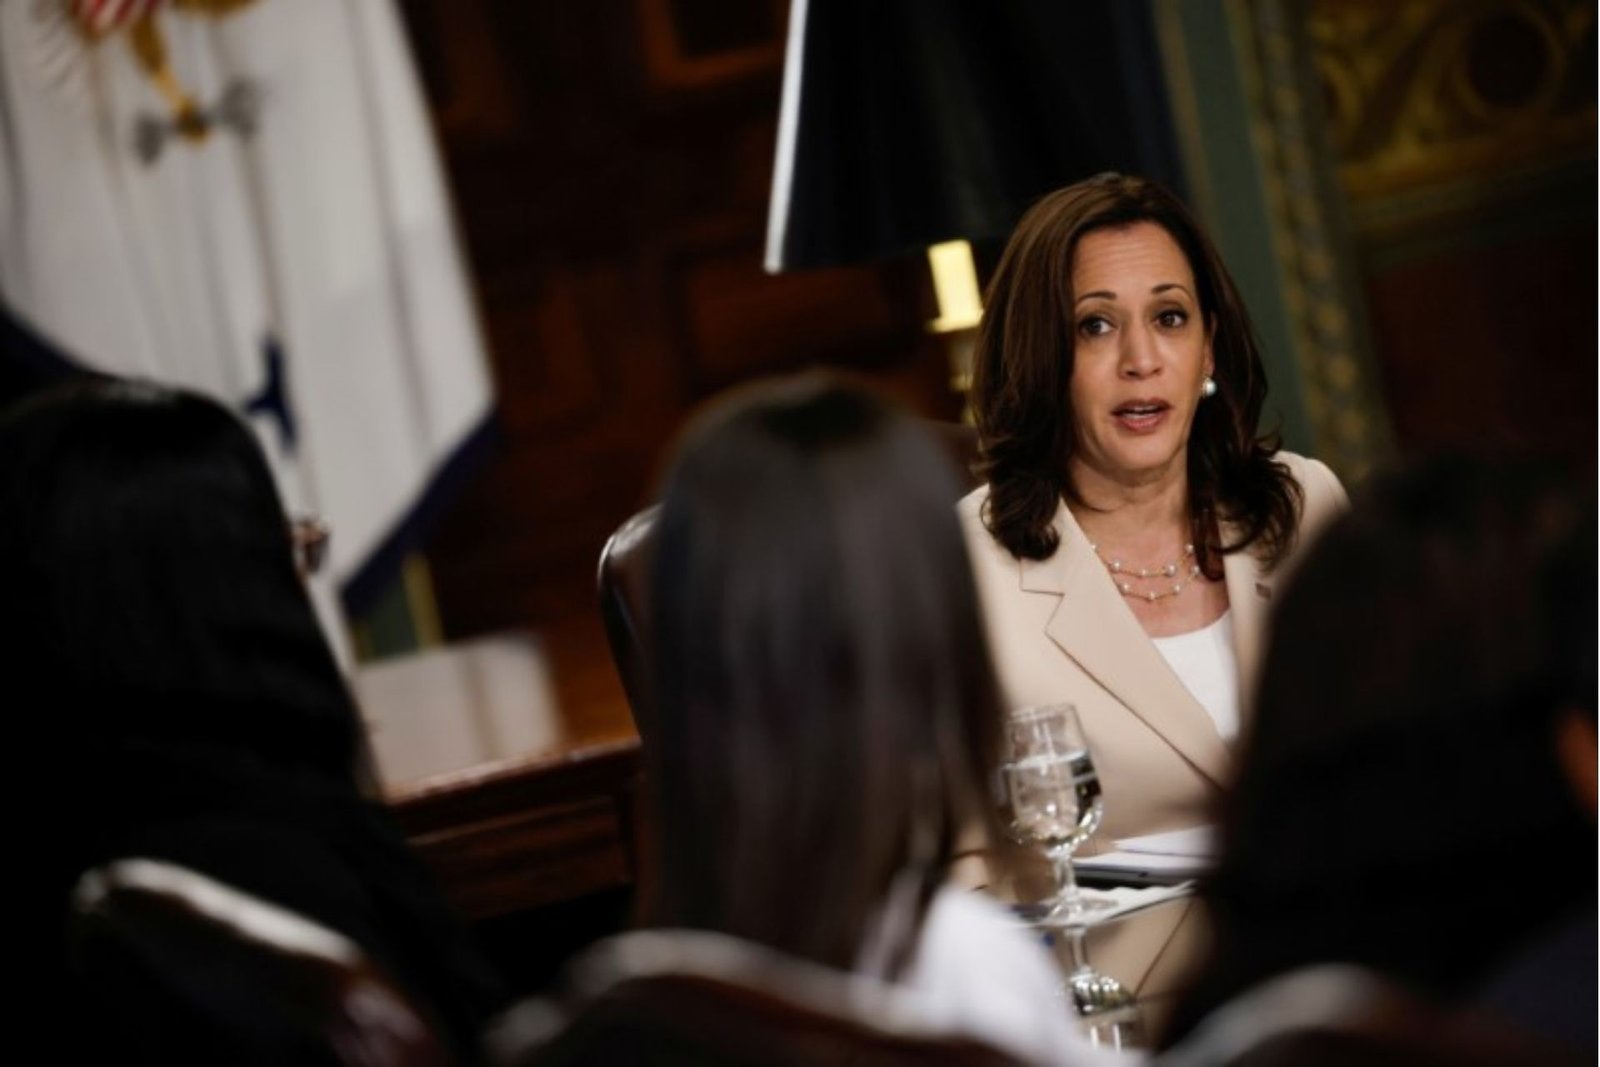 Kamala Harris Launches Campaign To Expand Voting Rights Across The U.S.